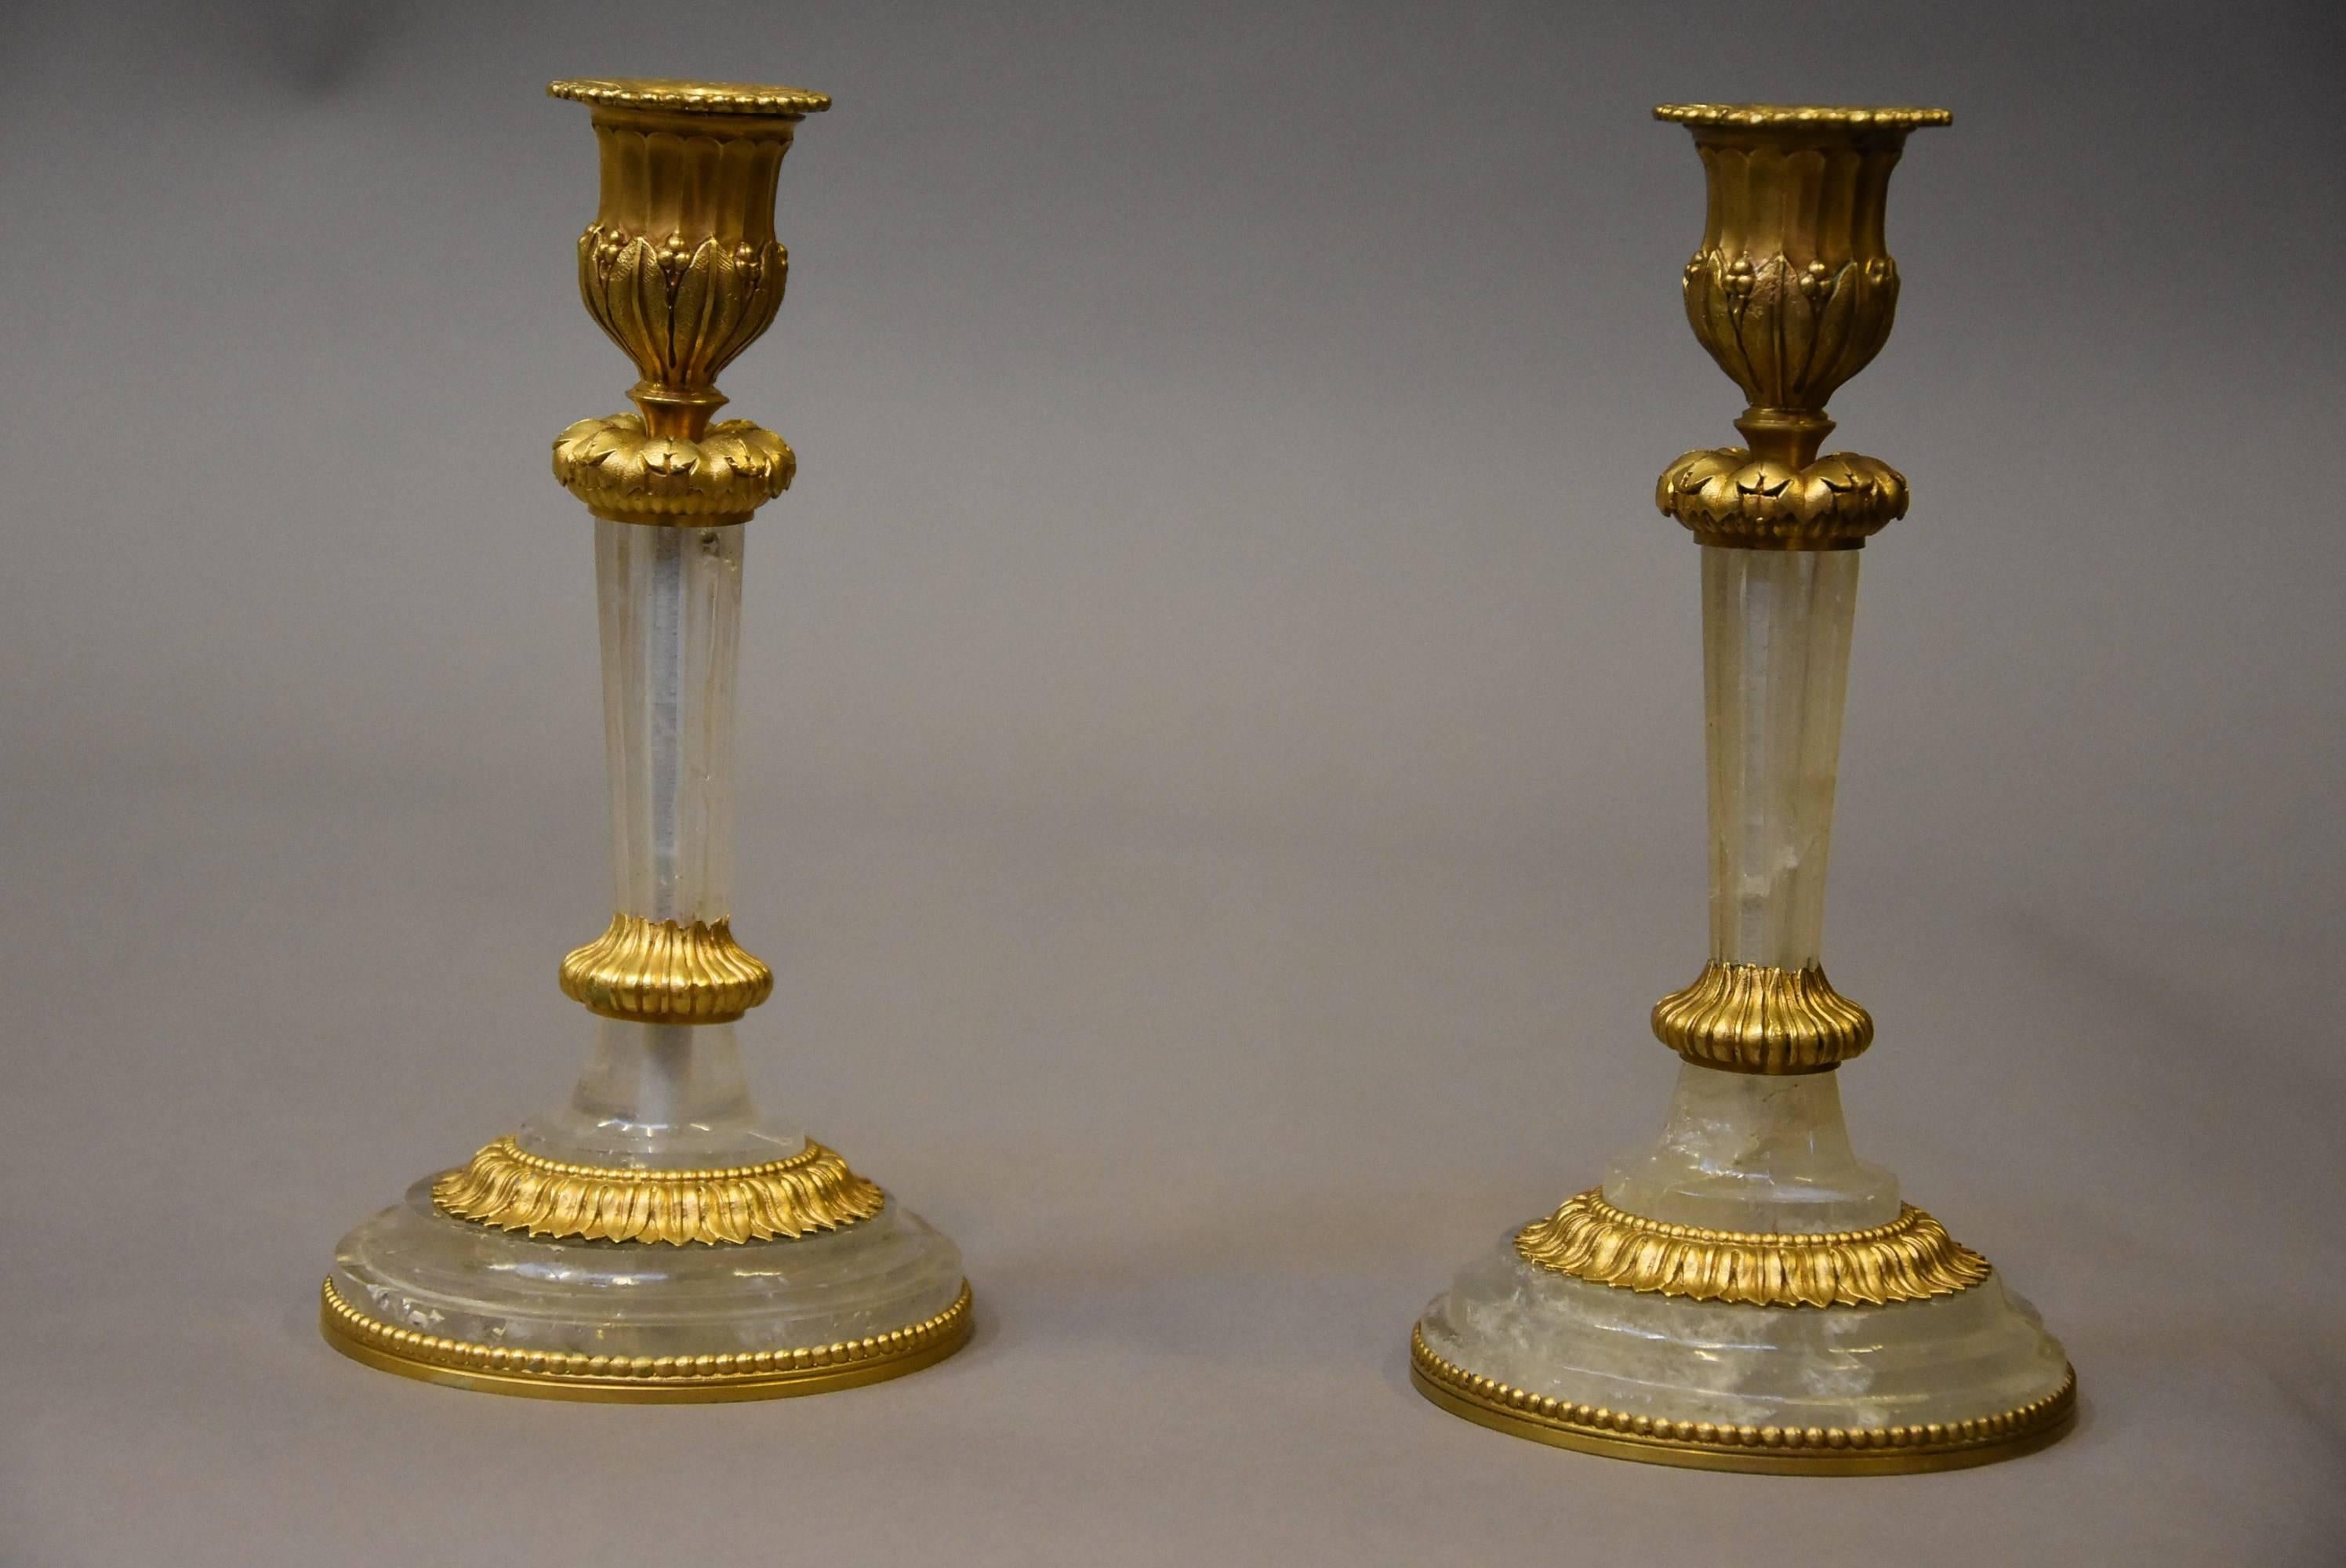 Pair of Elegant Early 20th Century Rock Crystal and Ormolu Candlesticks For Sale 3